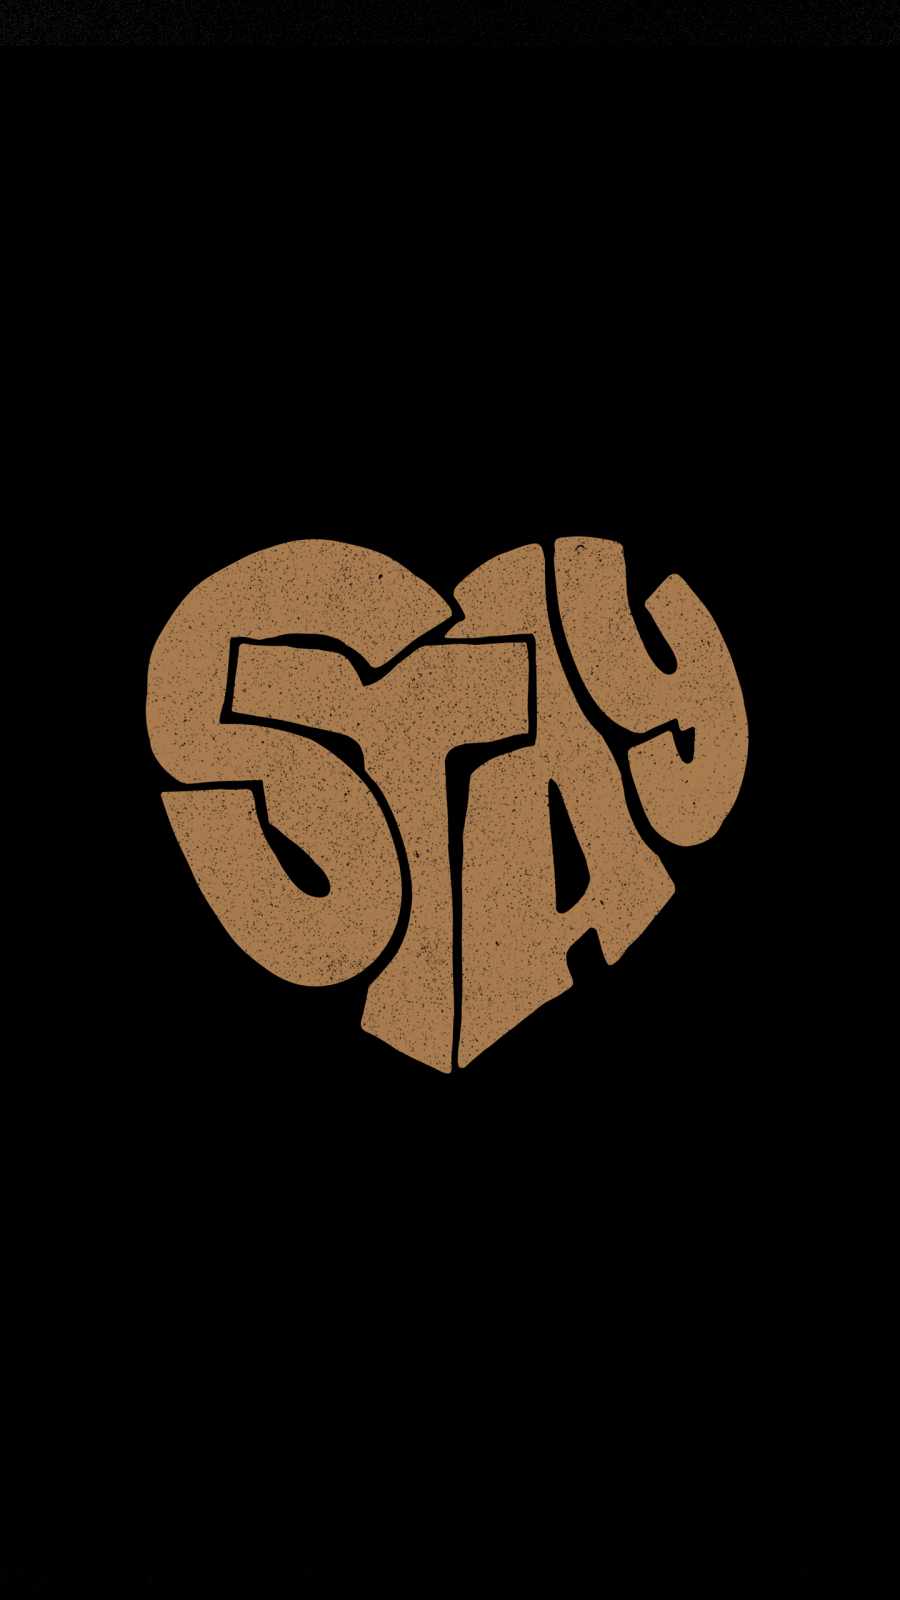 Stay iPhone Wallpaper